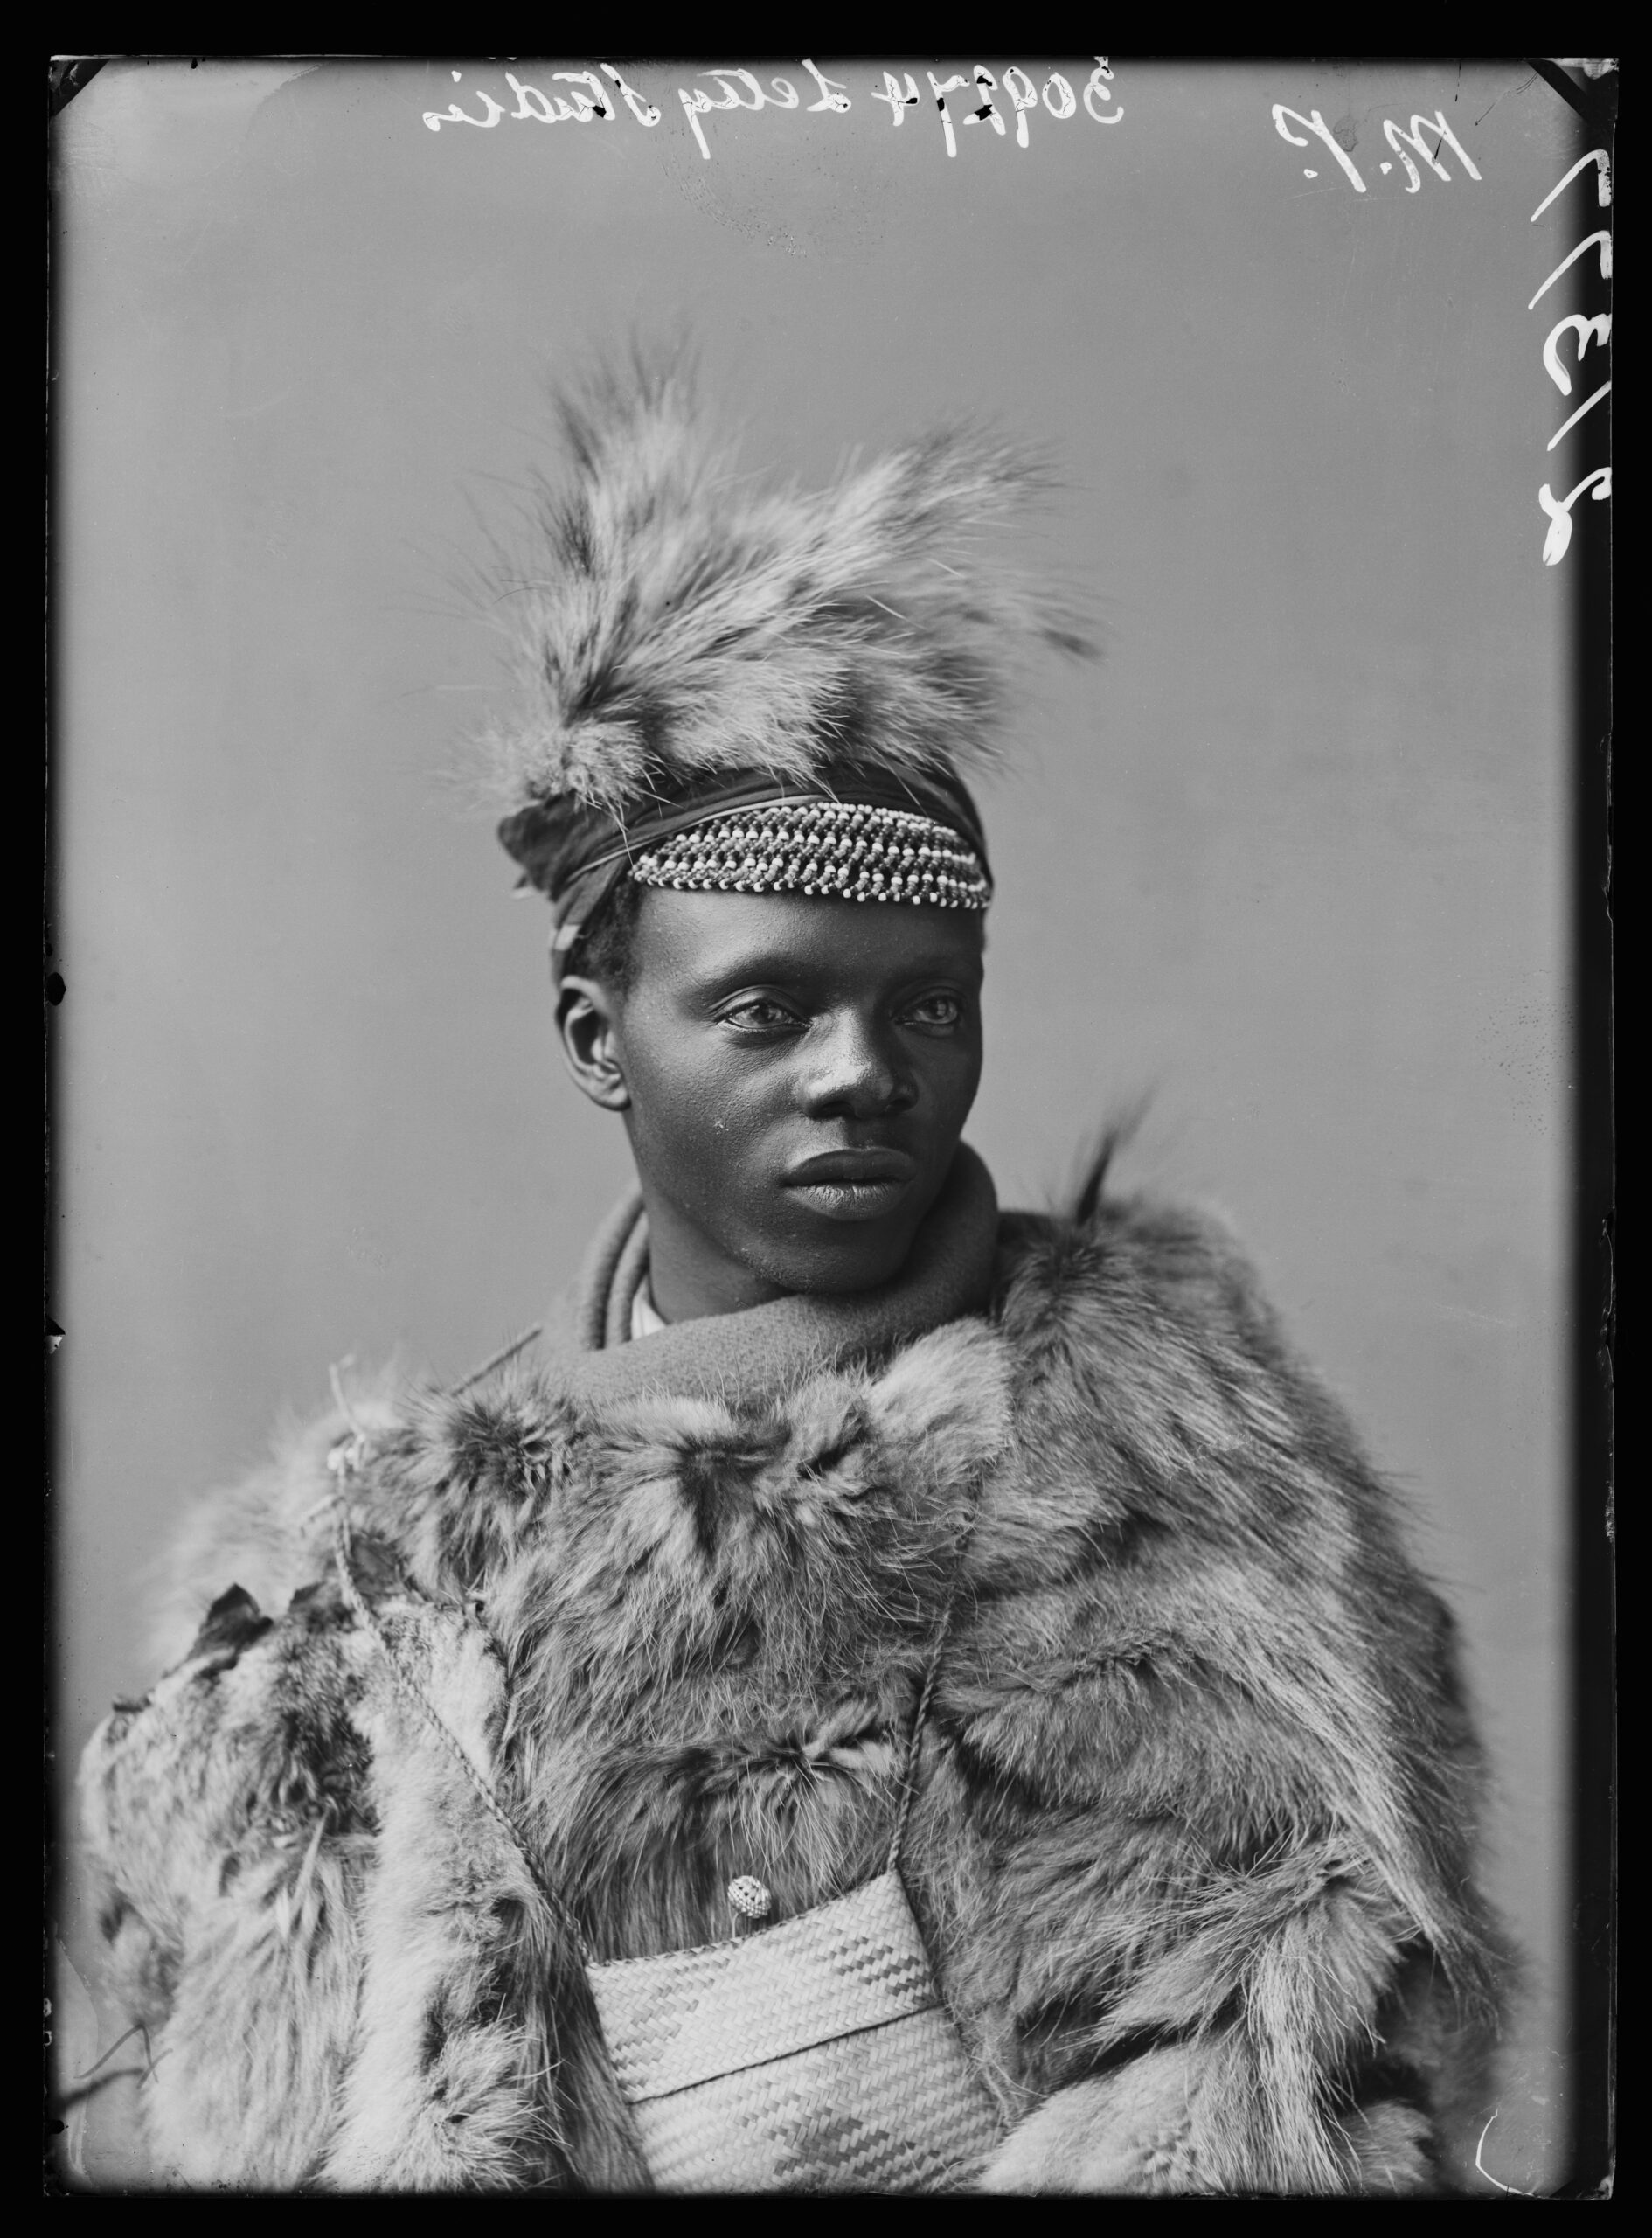 A studio portrait in black and white of a man wearing traditional dress, looking off to the left